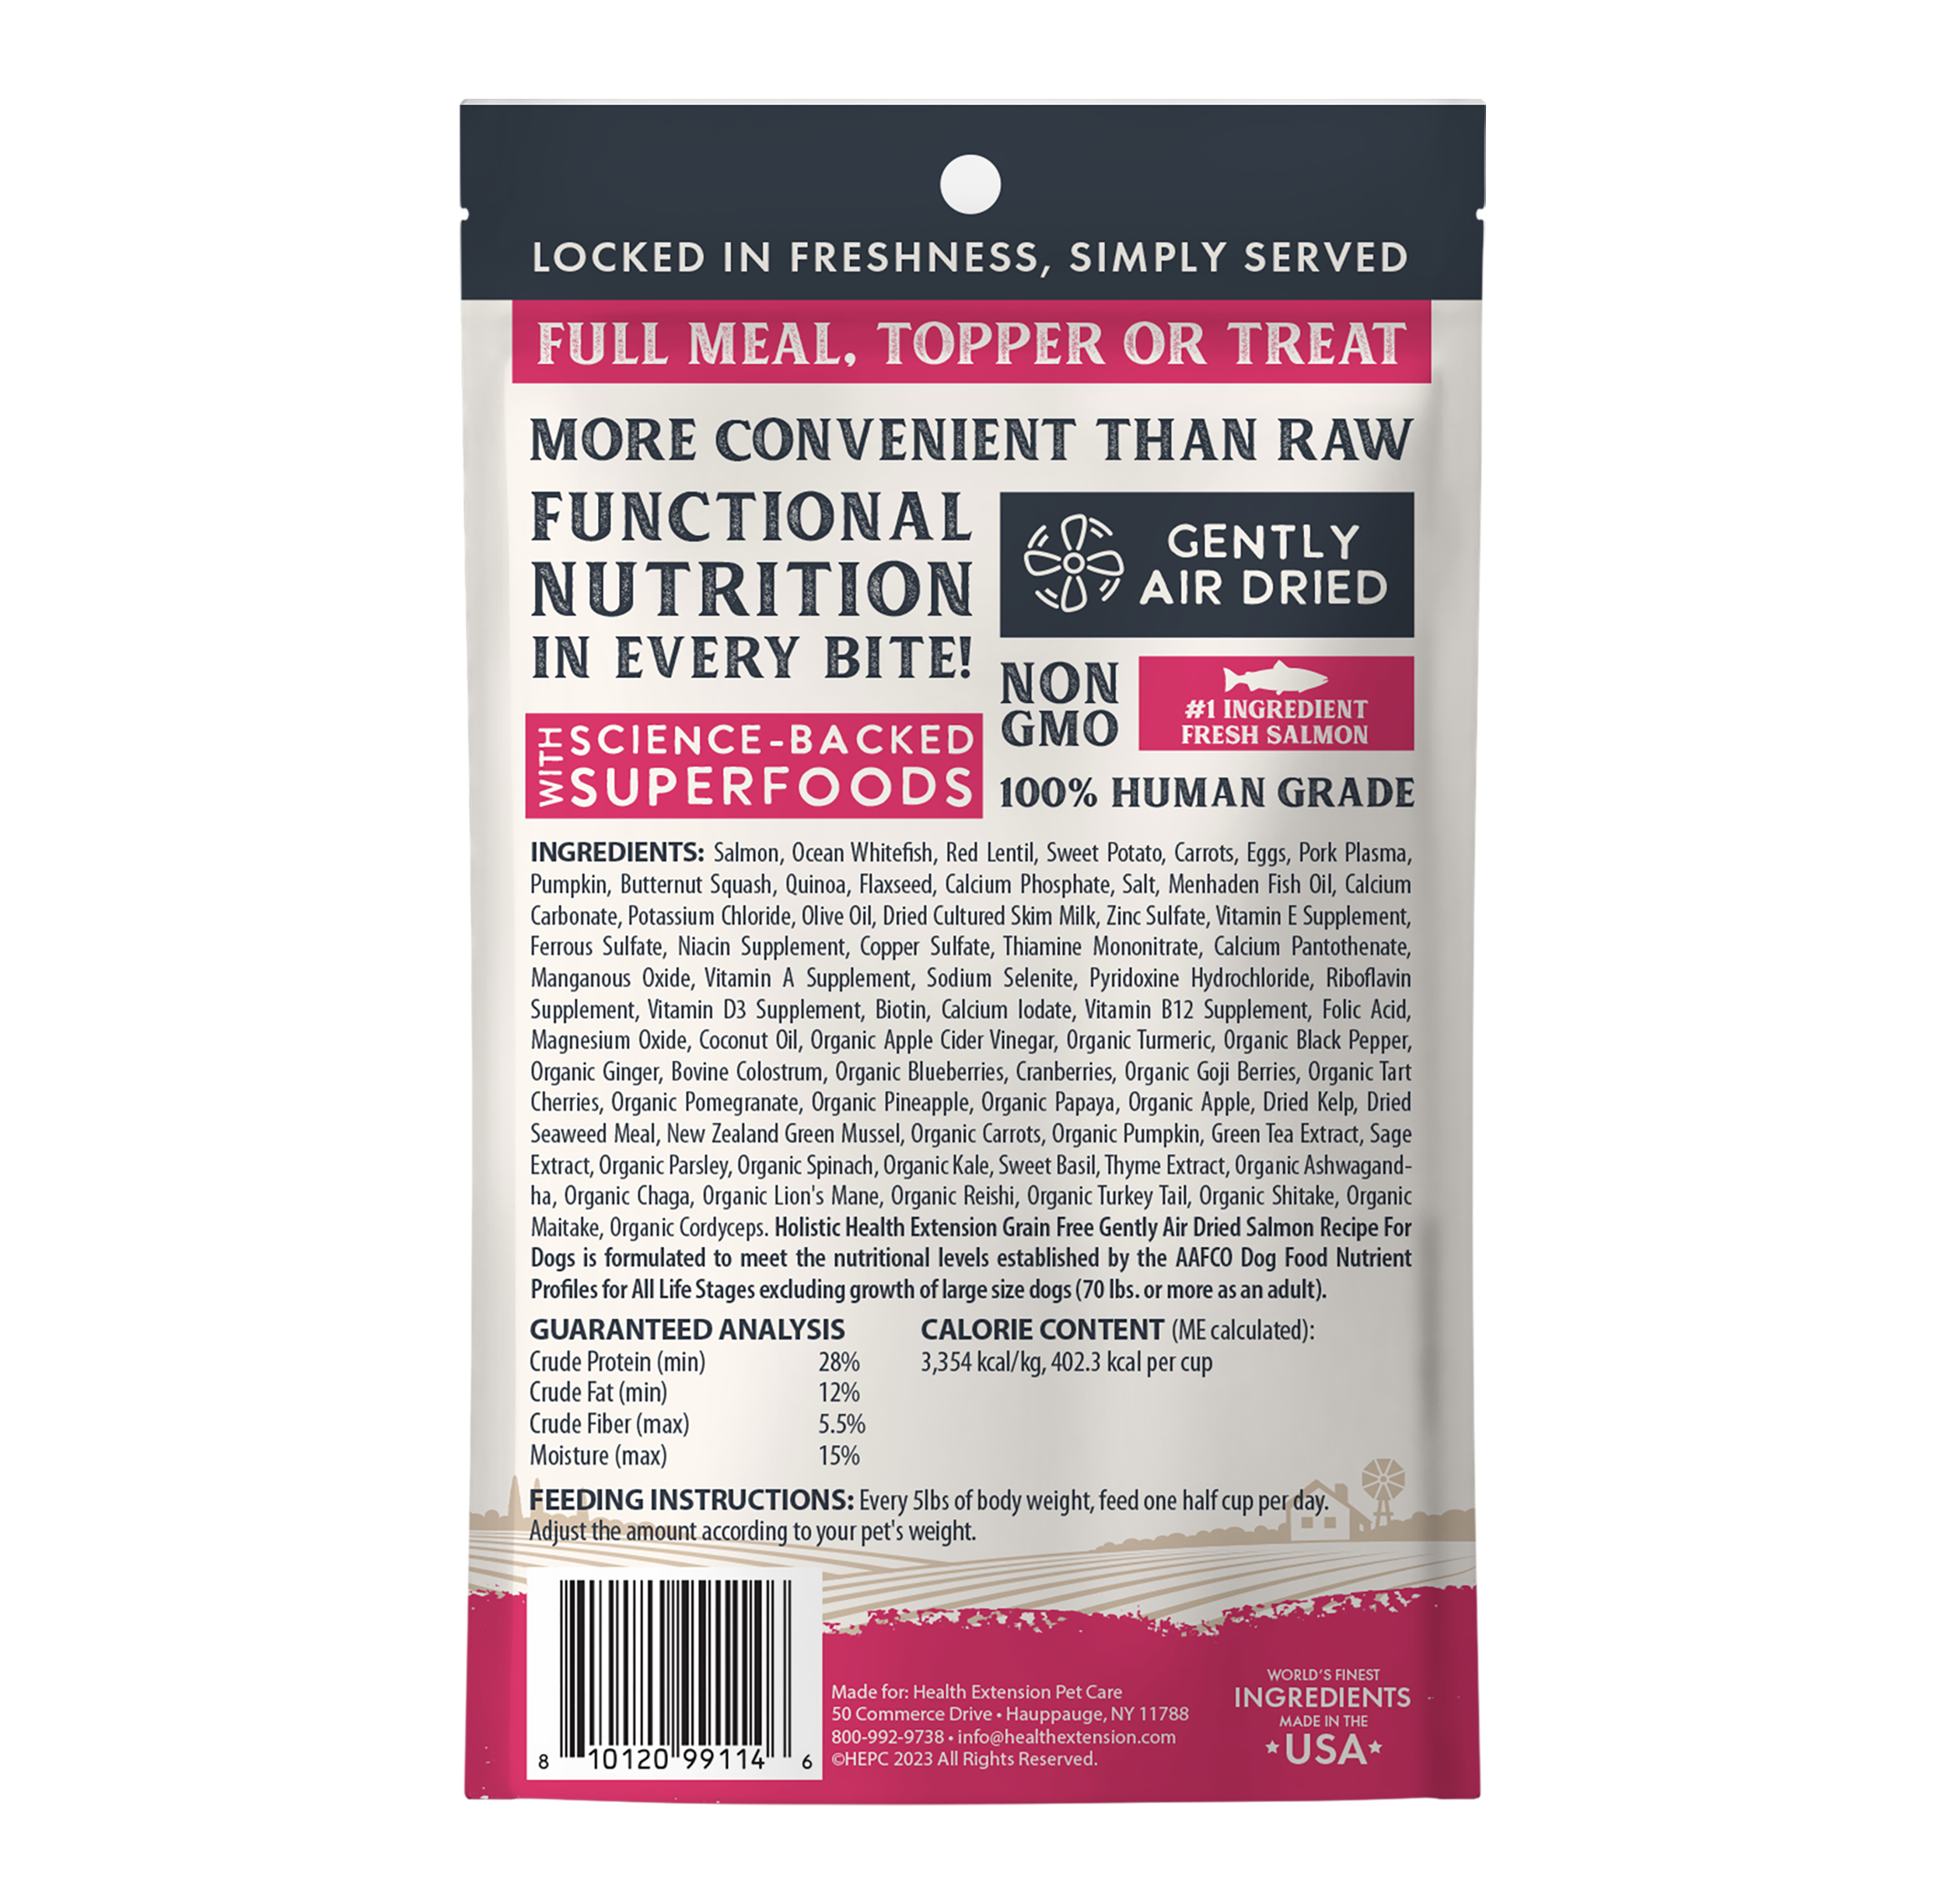 Ingredients and health benefits on Health Extension Salmon dog food, with superfoods for immunity.